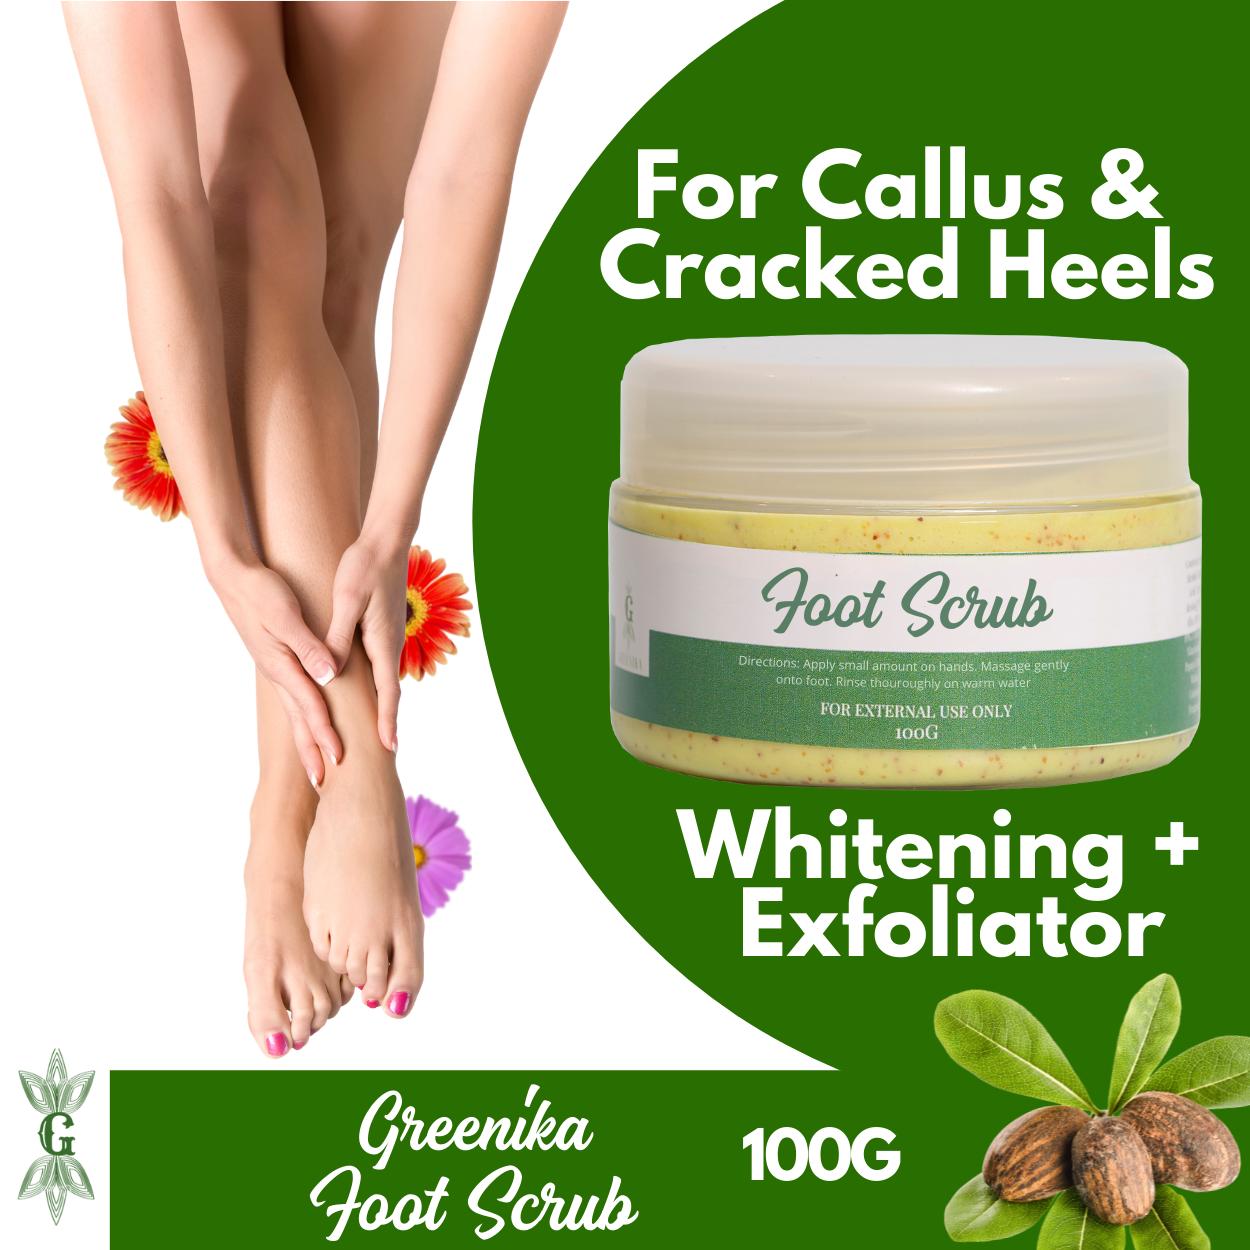 [ MOISTURIZER + WHITENING ] Greenika Foot Scrub for Smoother Soft Silky Clearer Foot Removes Dead Skin Cells Spa at Home Skin Care Product Removes Calluses Cracked Heel Foot Soak Moisturizes Best Looking Organic